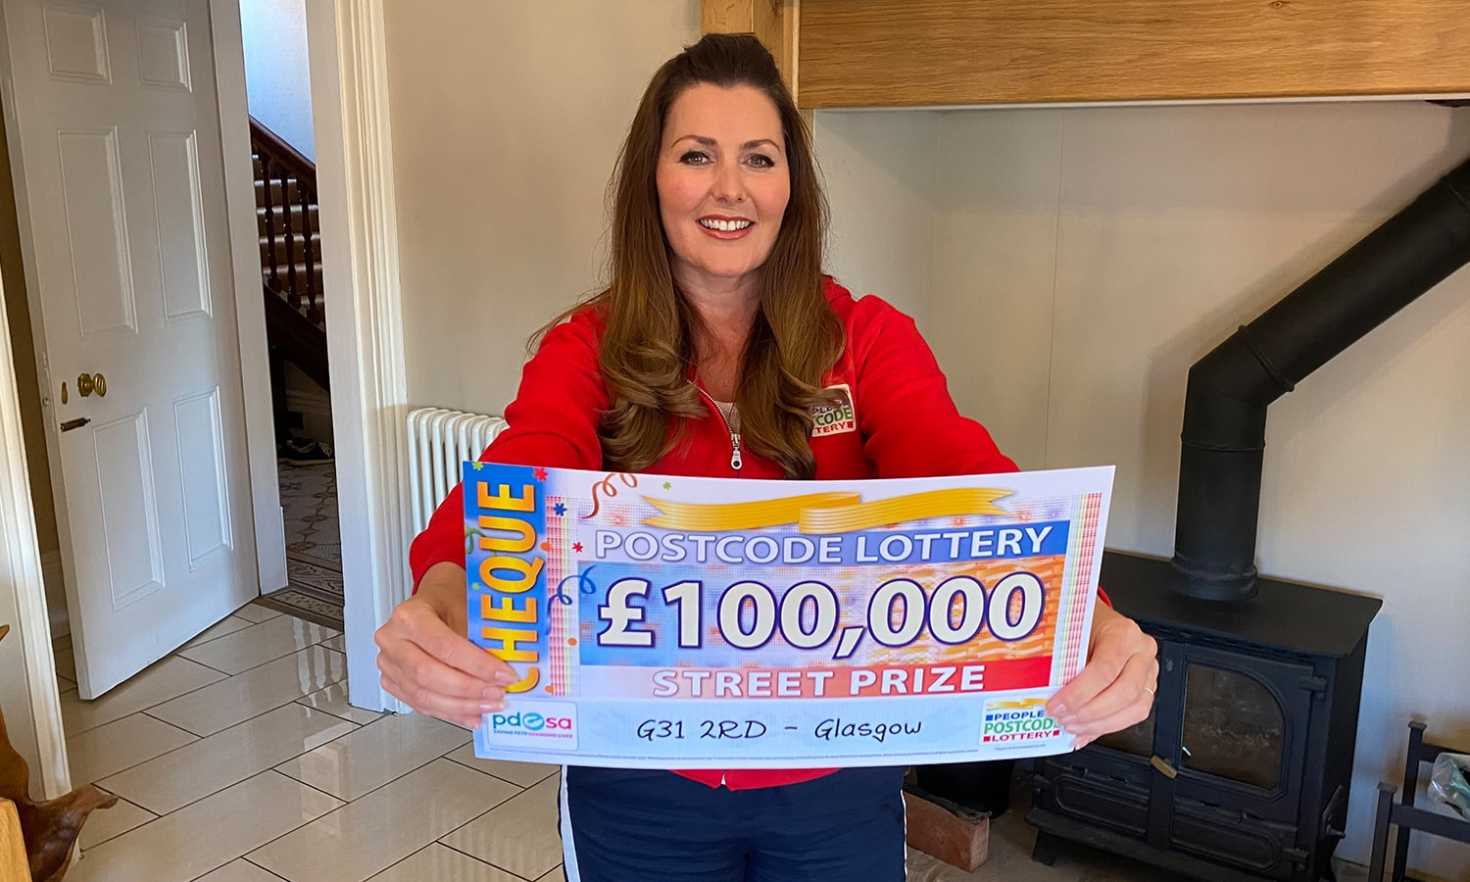 Our latest Street Prize winner scoops a whopping £100,000 prize thanks to playing with two tickets!